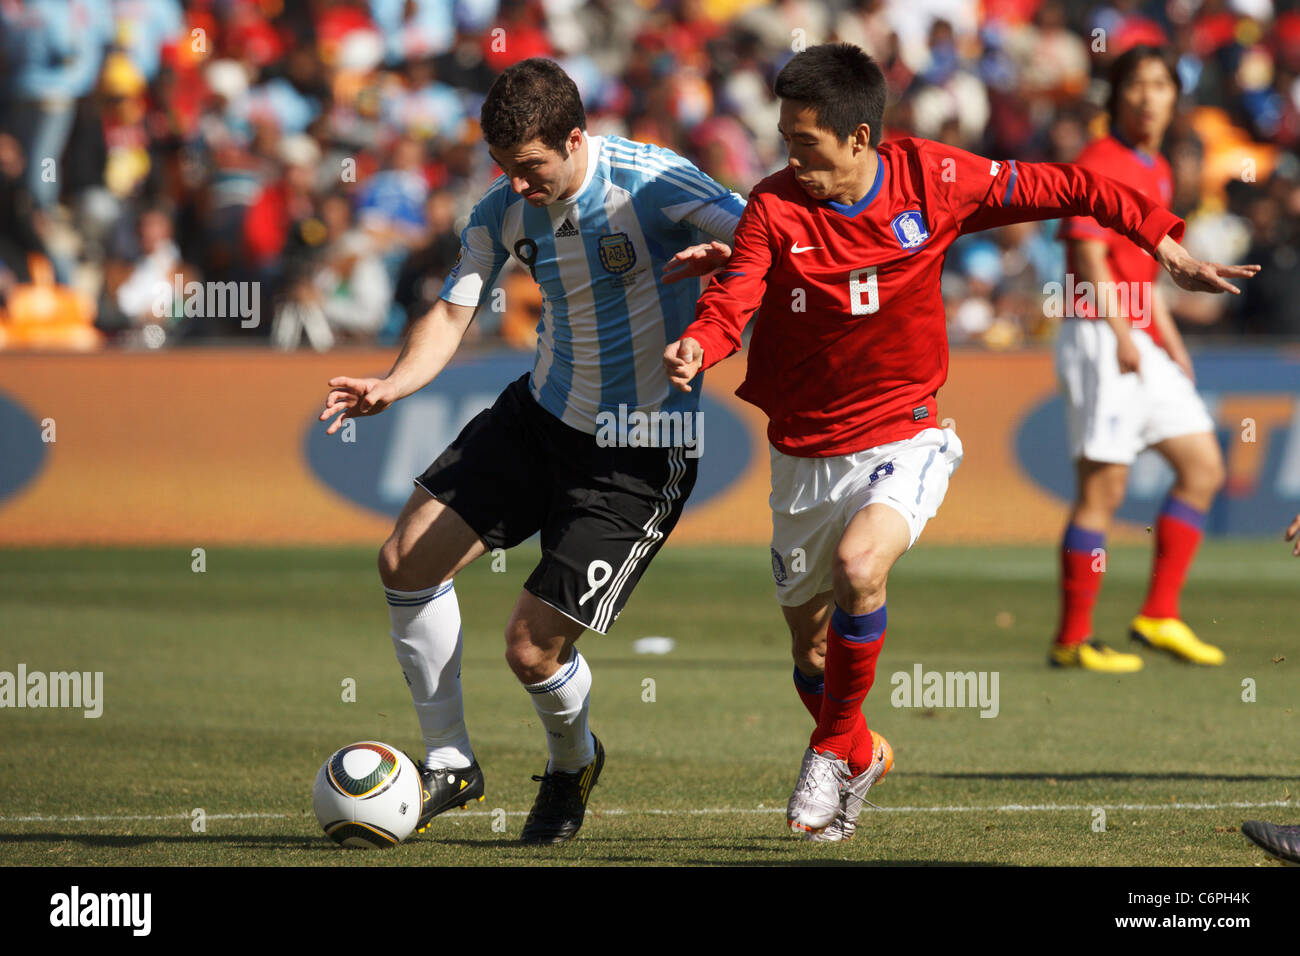 Jung Woo Kim of South Korea (r) defends against Gonzalo Higuain of Argentina (l) during a 2010 World Cup soccer match. Stock Photo